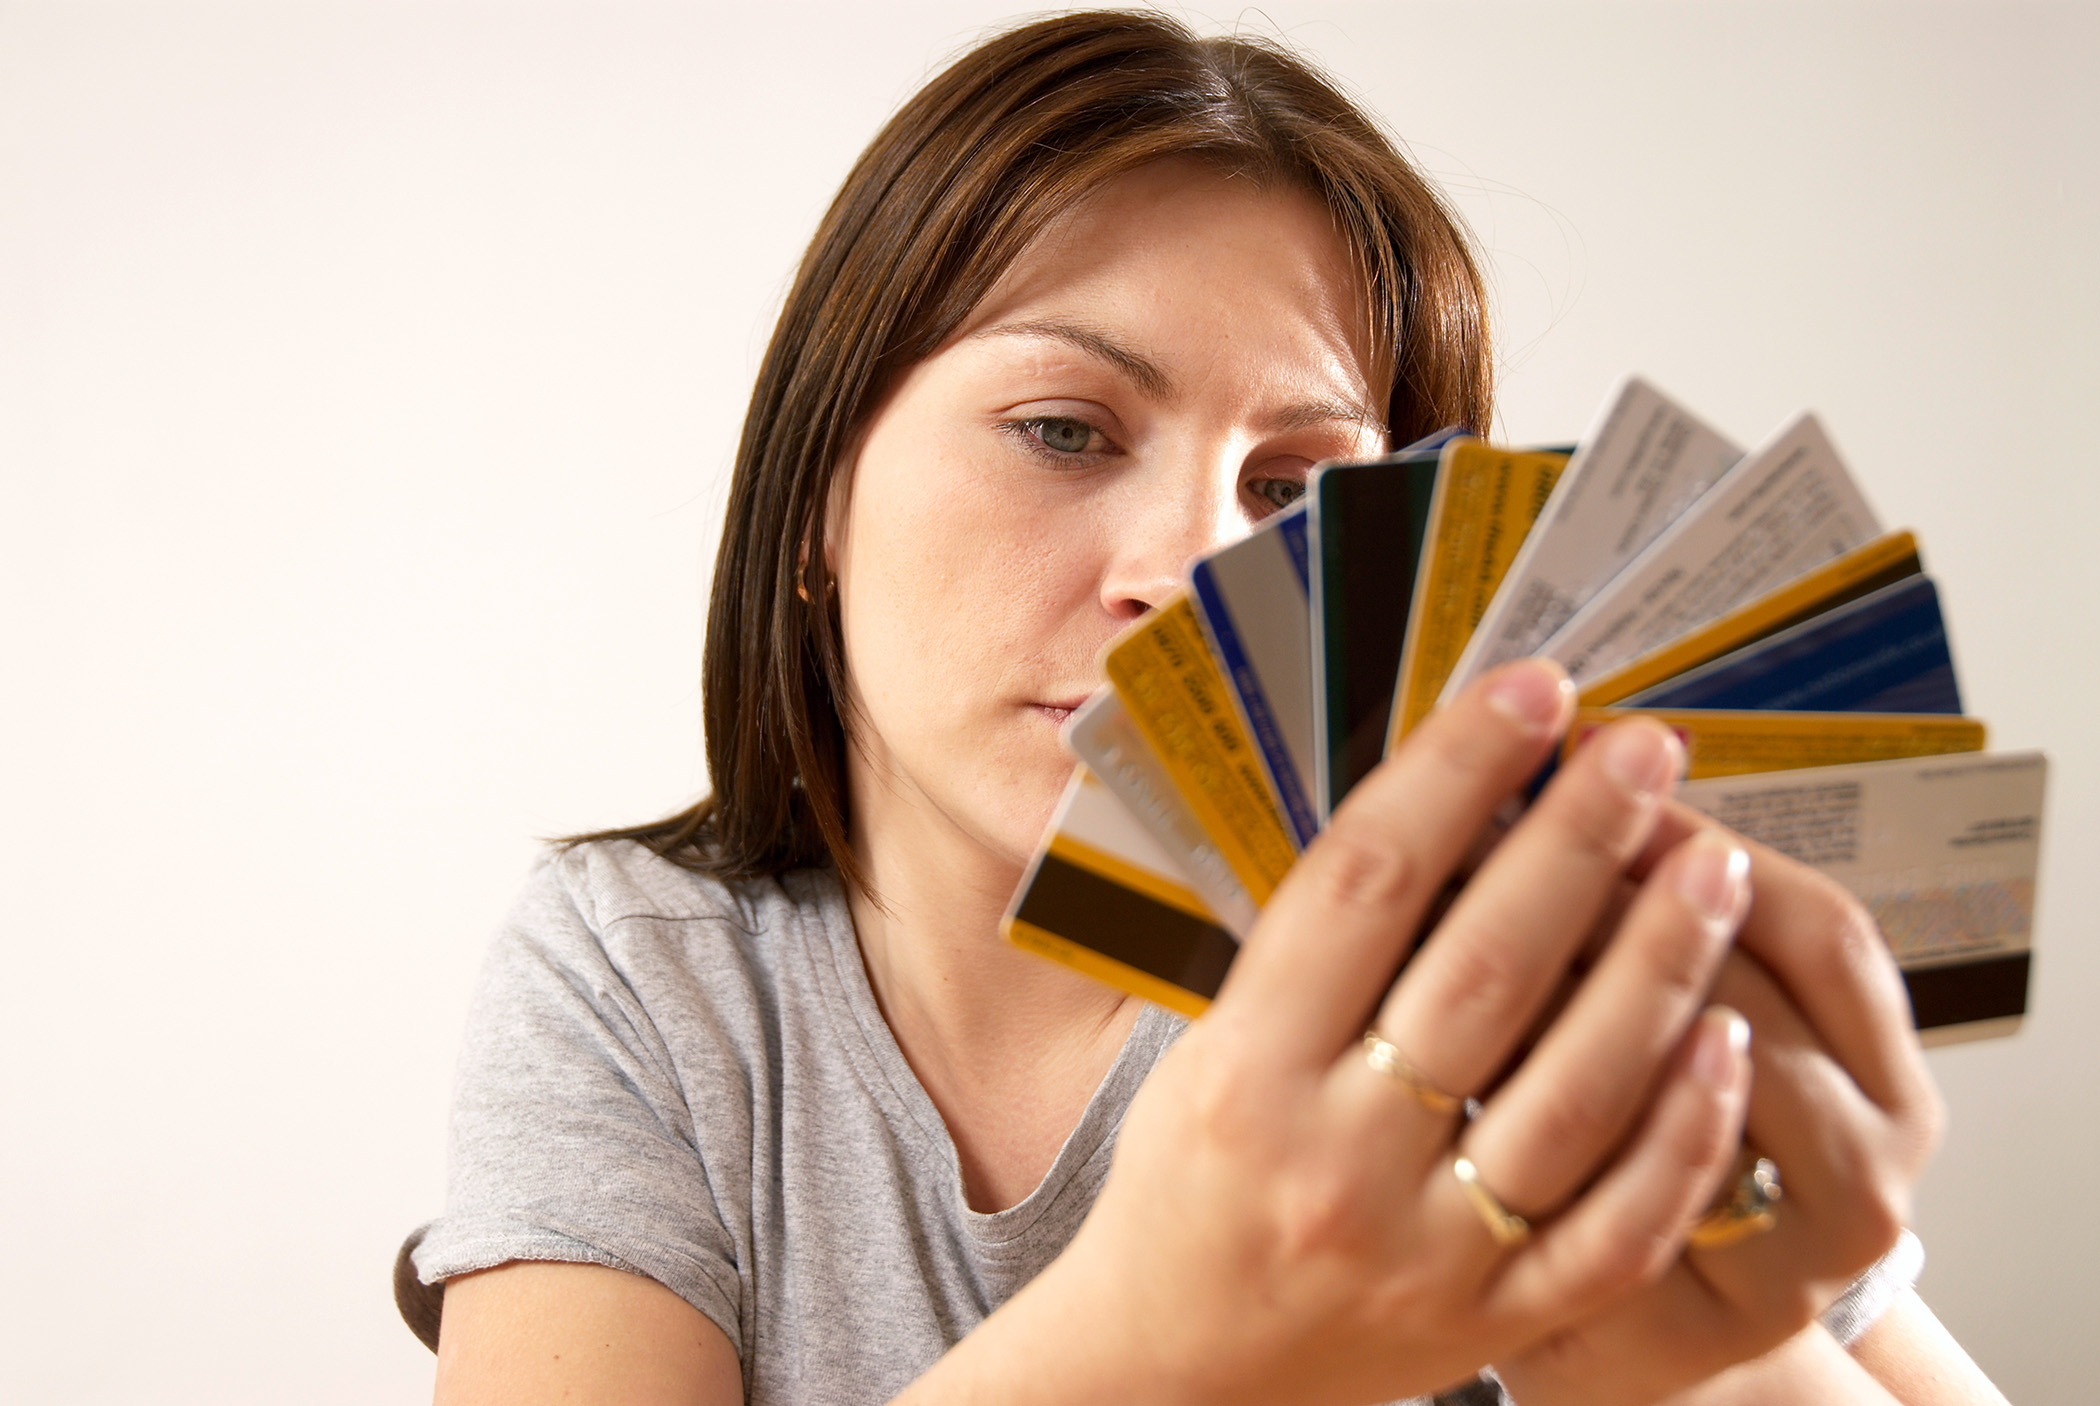 The Scary Link Between Credit Card Debt and Depression